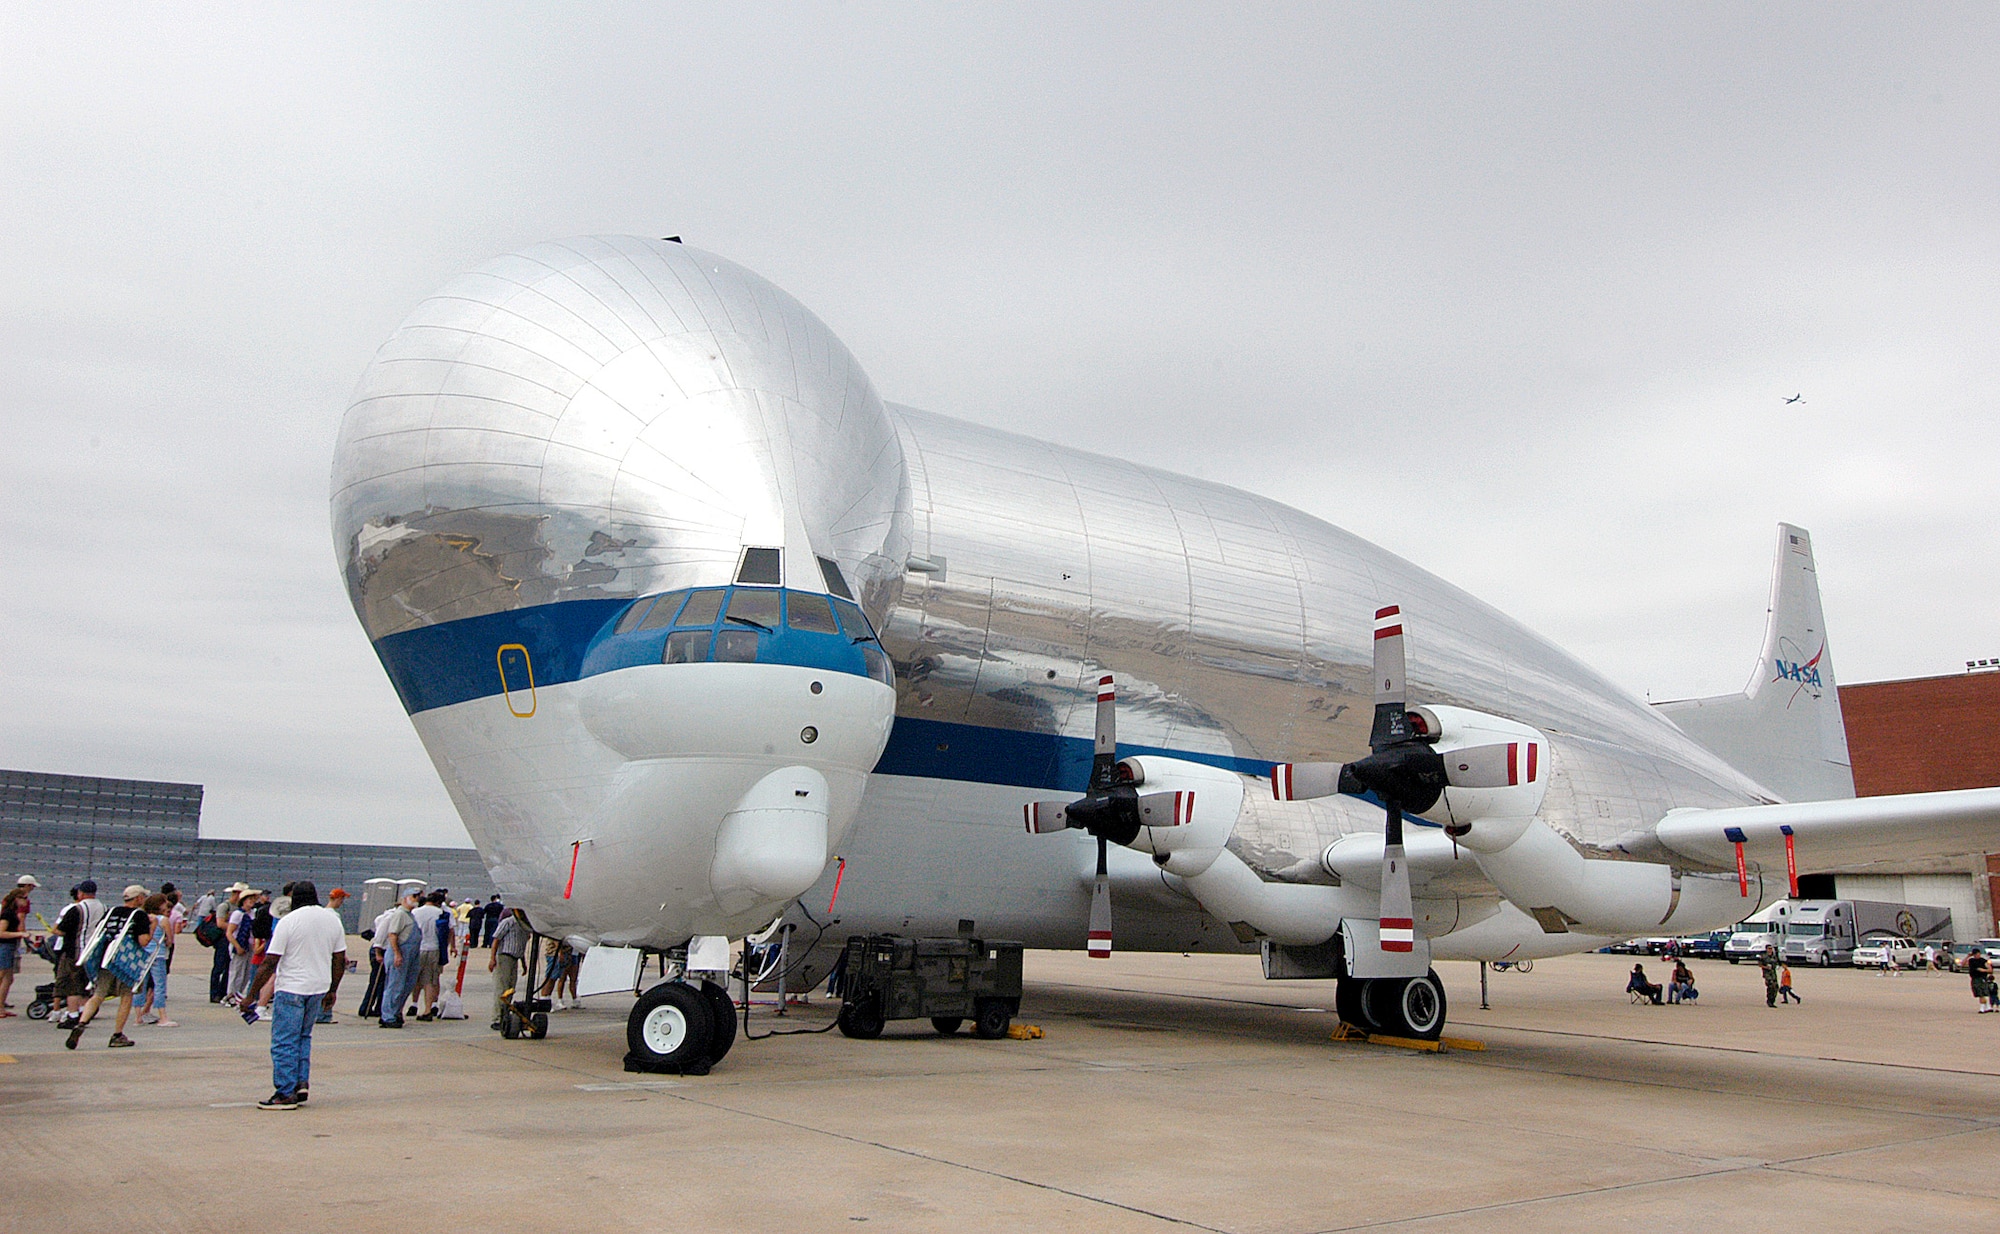 NASA’s Super Guppy aircraft is pictured here after a previous visit to the paint shop.The aircraft, which swings open behind the cockpit to allow for loading and transport of space-program parts, went through an extensive inspection and overhaul here. (Air Force photo/Margo Wright) 